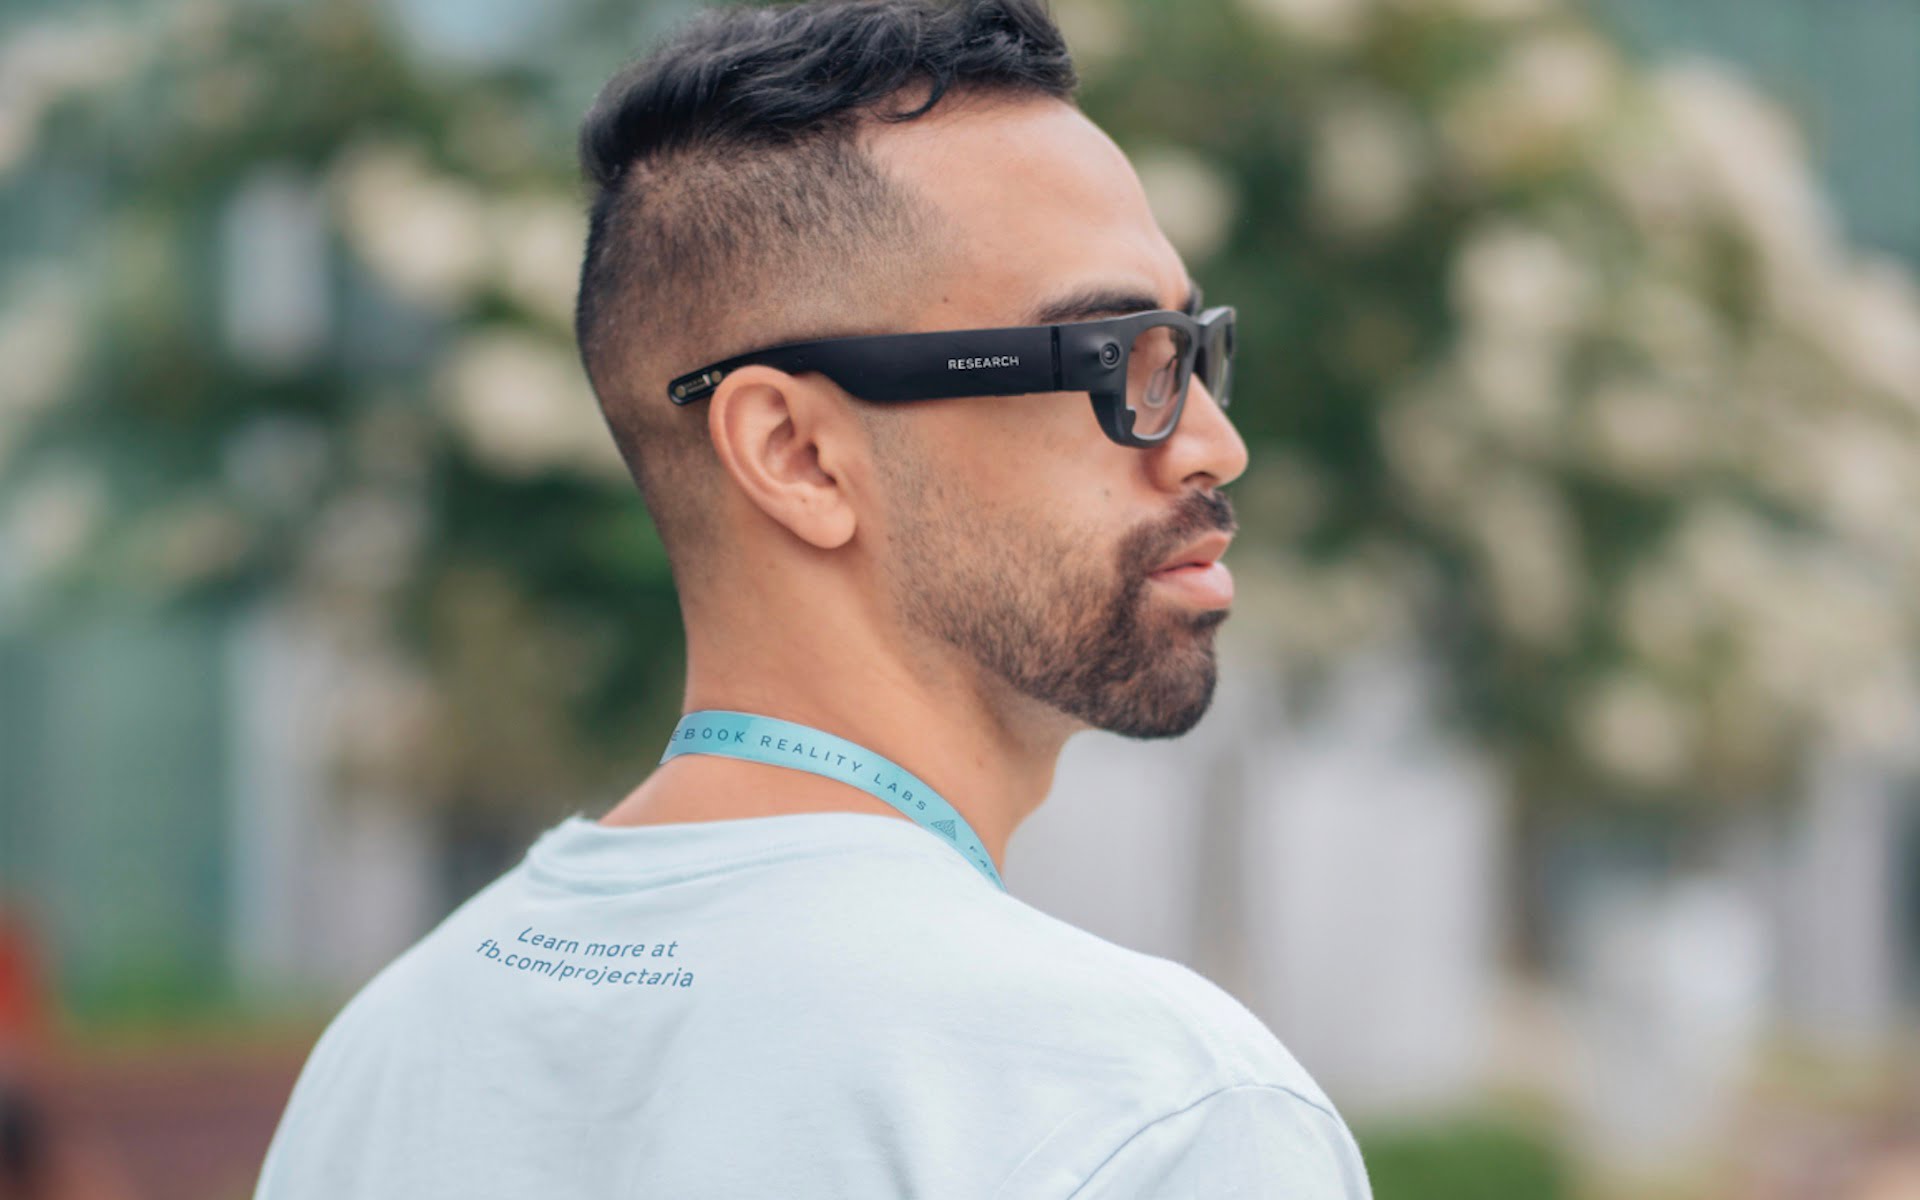 Meta's first AR headset aims to be a "first-ever of its kind"